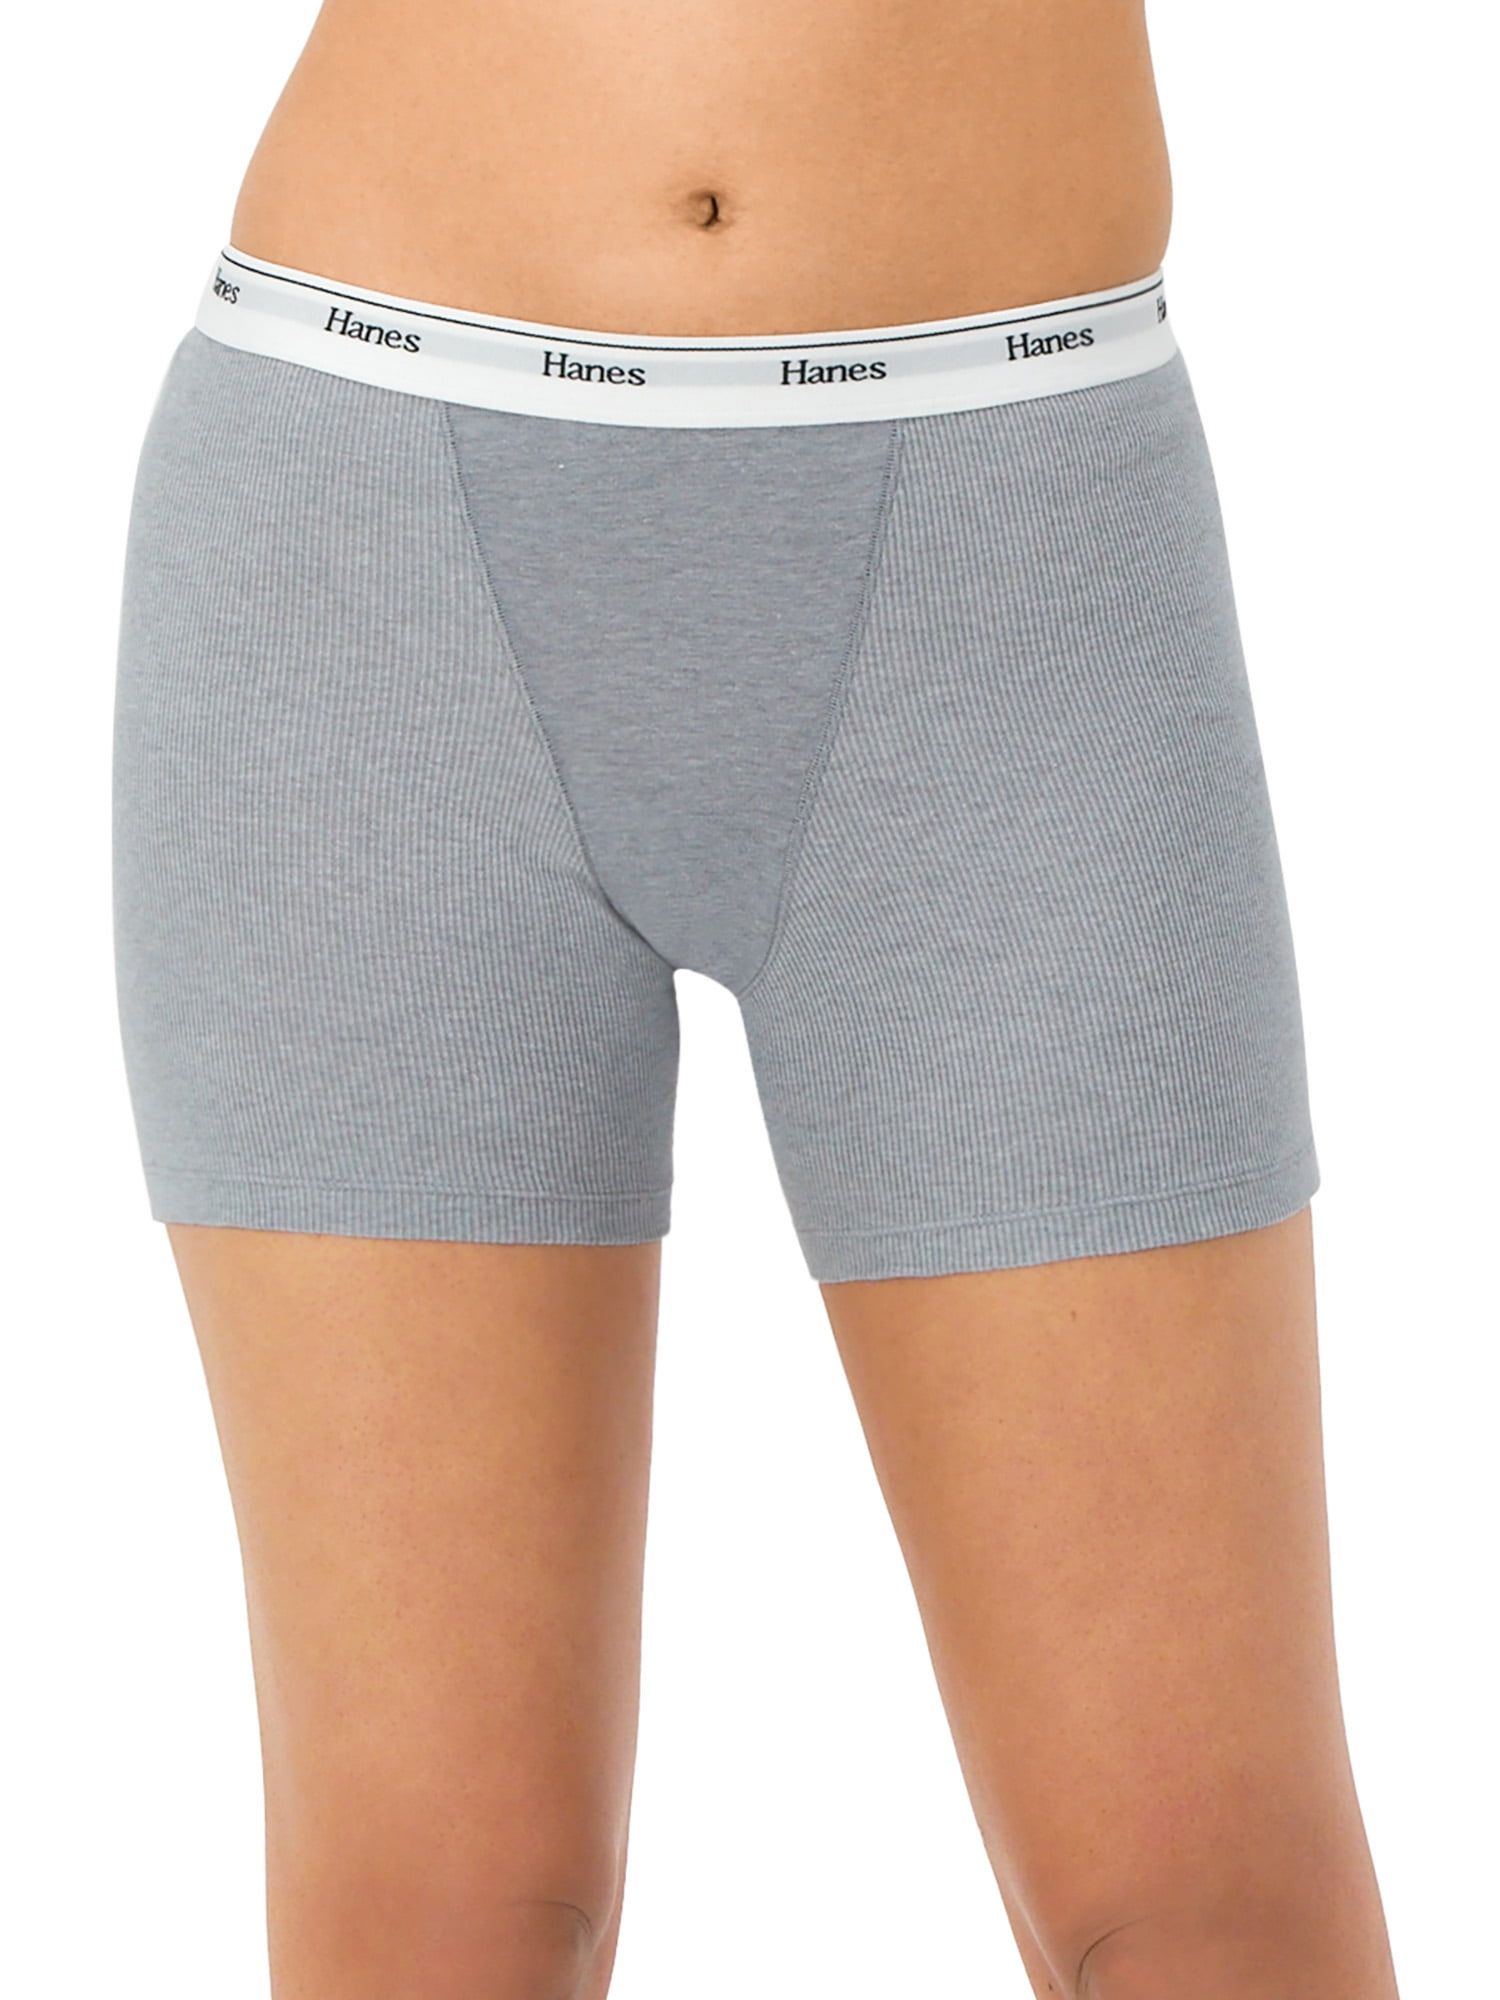 Hanes Womens Breathable Cotton Stretch Brief in Gray